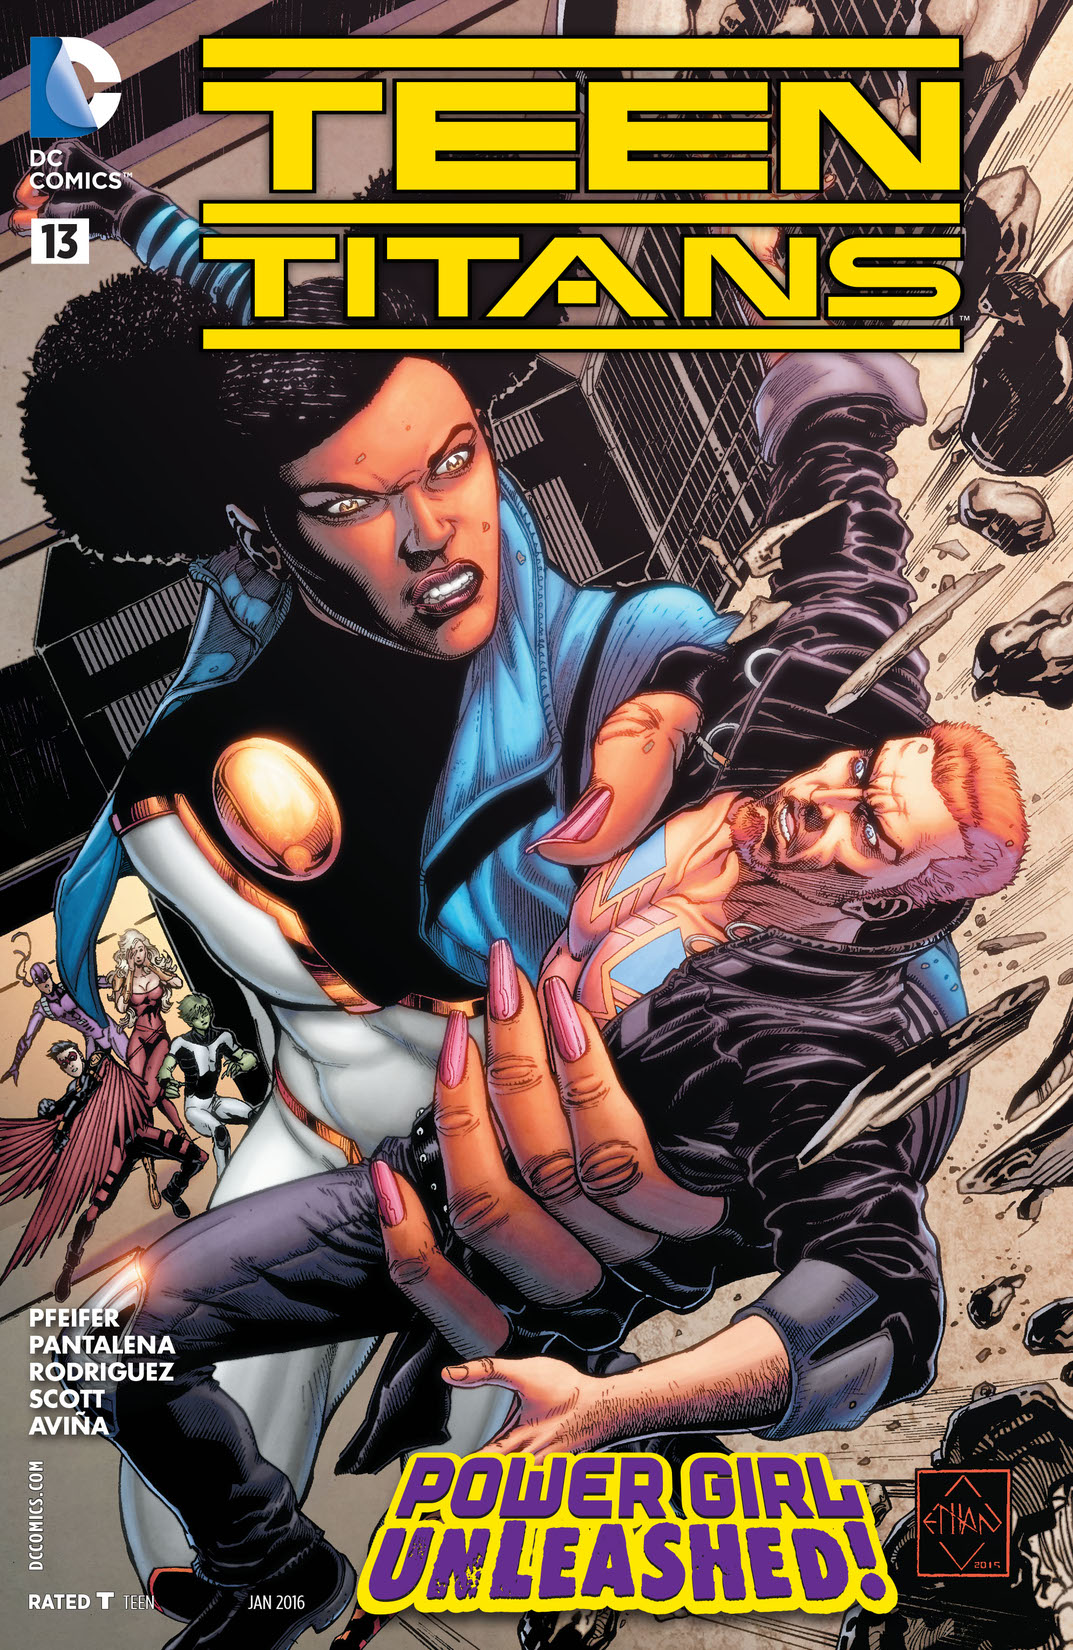 Teen Titans (2014-) #13 preview images